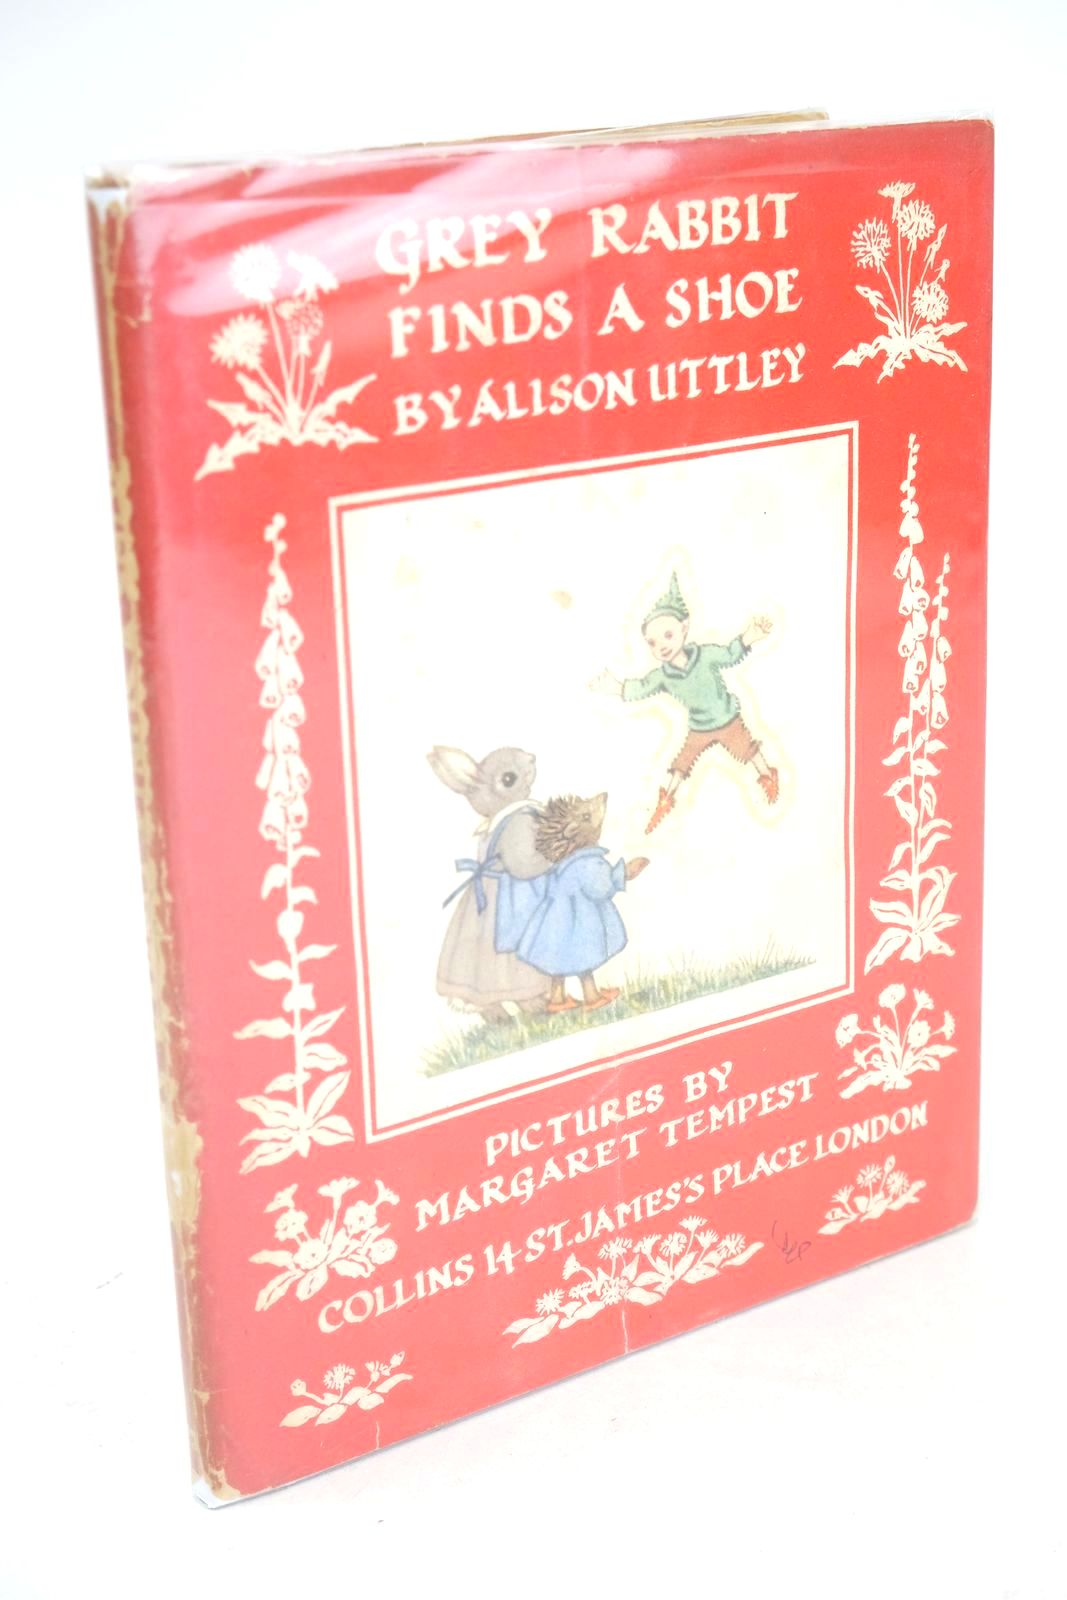 Photo of GREY RABBIT FINDS A SHOE written by Uttley, Alison illustrated by Tempest, Margaret published by Collins (STOCK CODE: 1325536)  for sale by Stella & Rose's Books